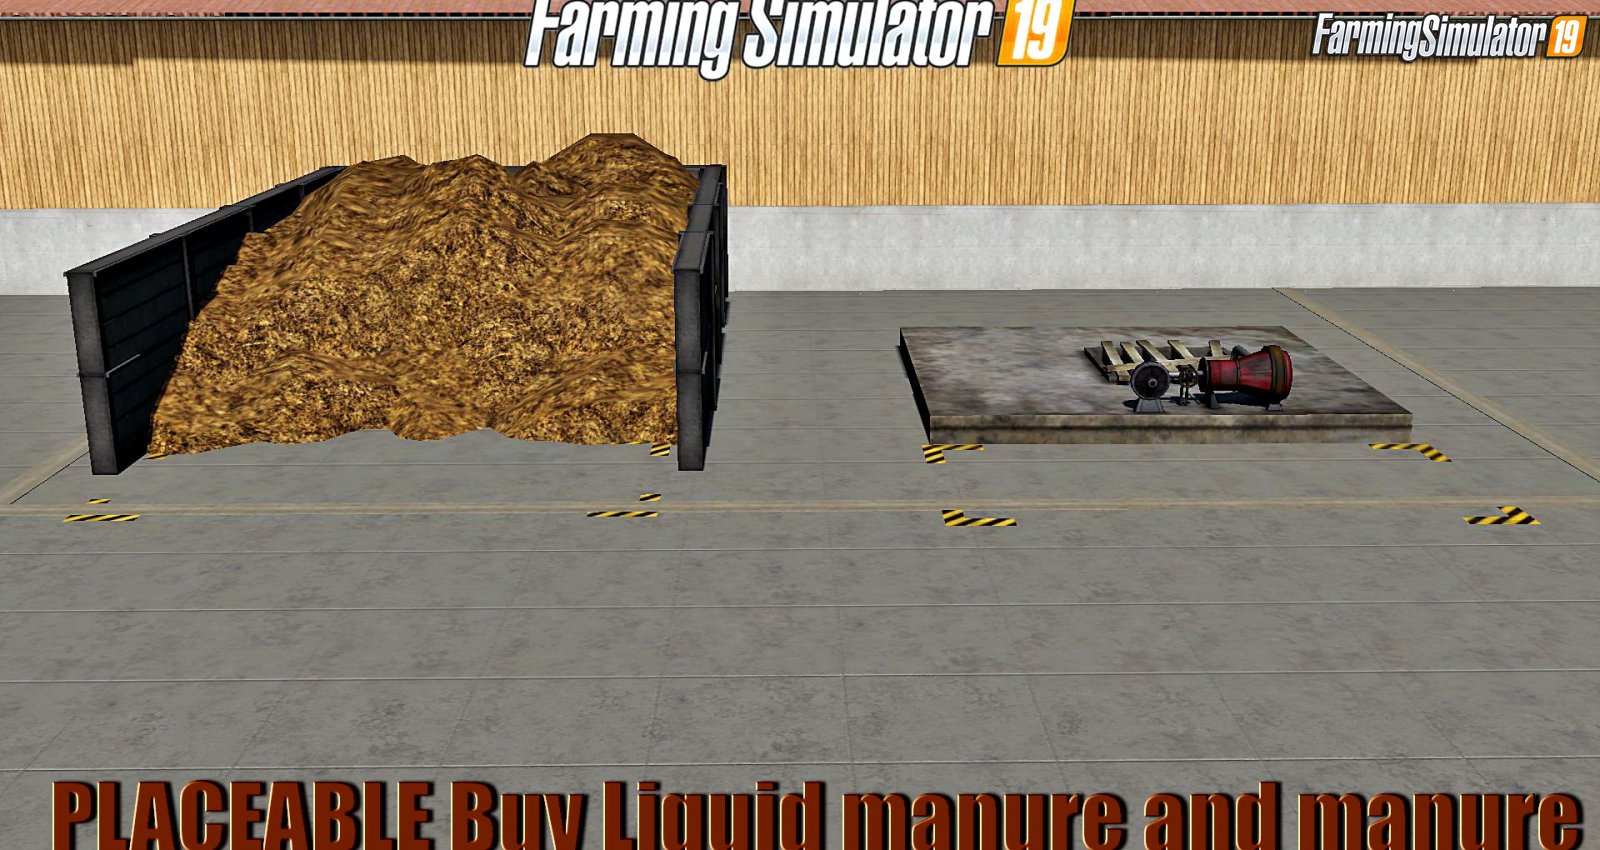 PLACEABLE Buy Liquid manure and manure v2.0 for FS19